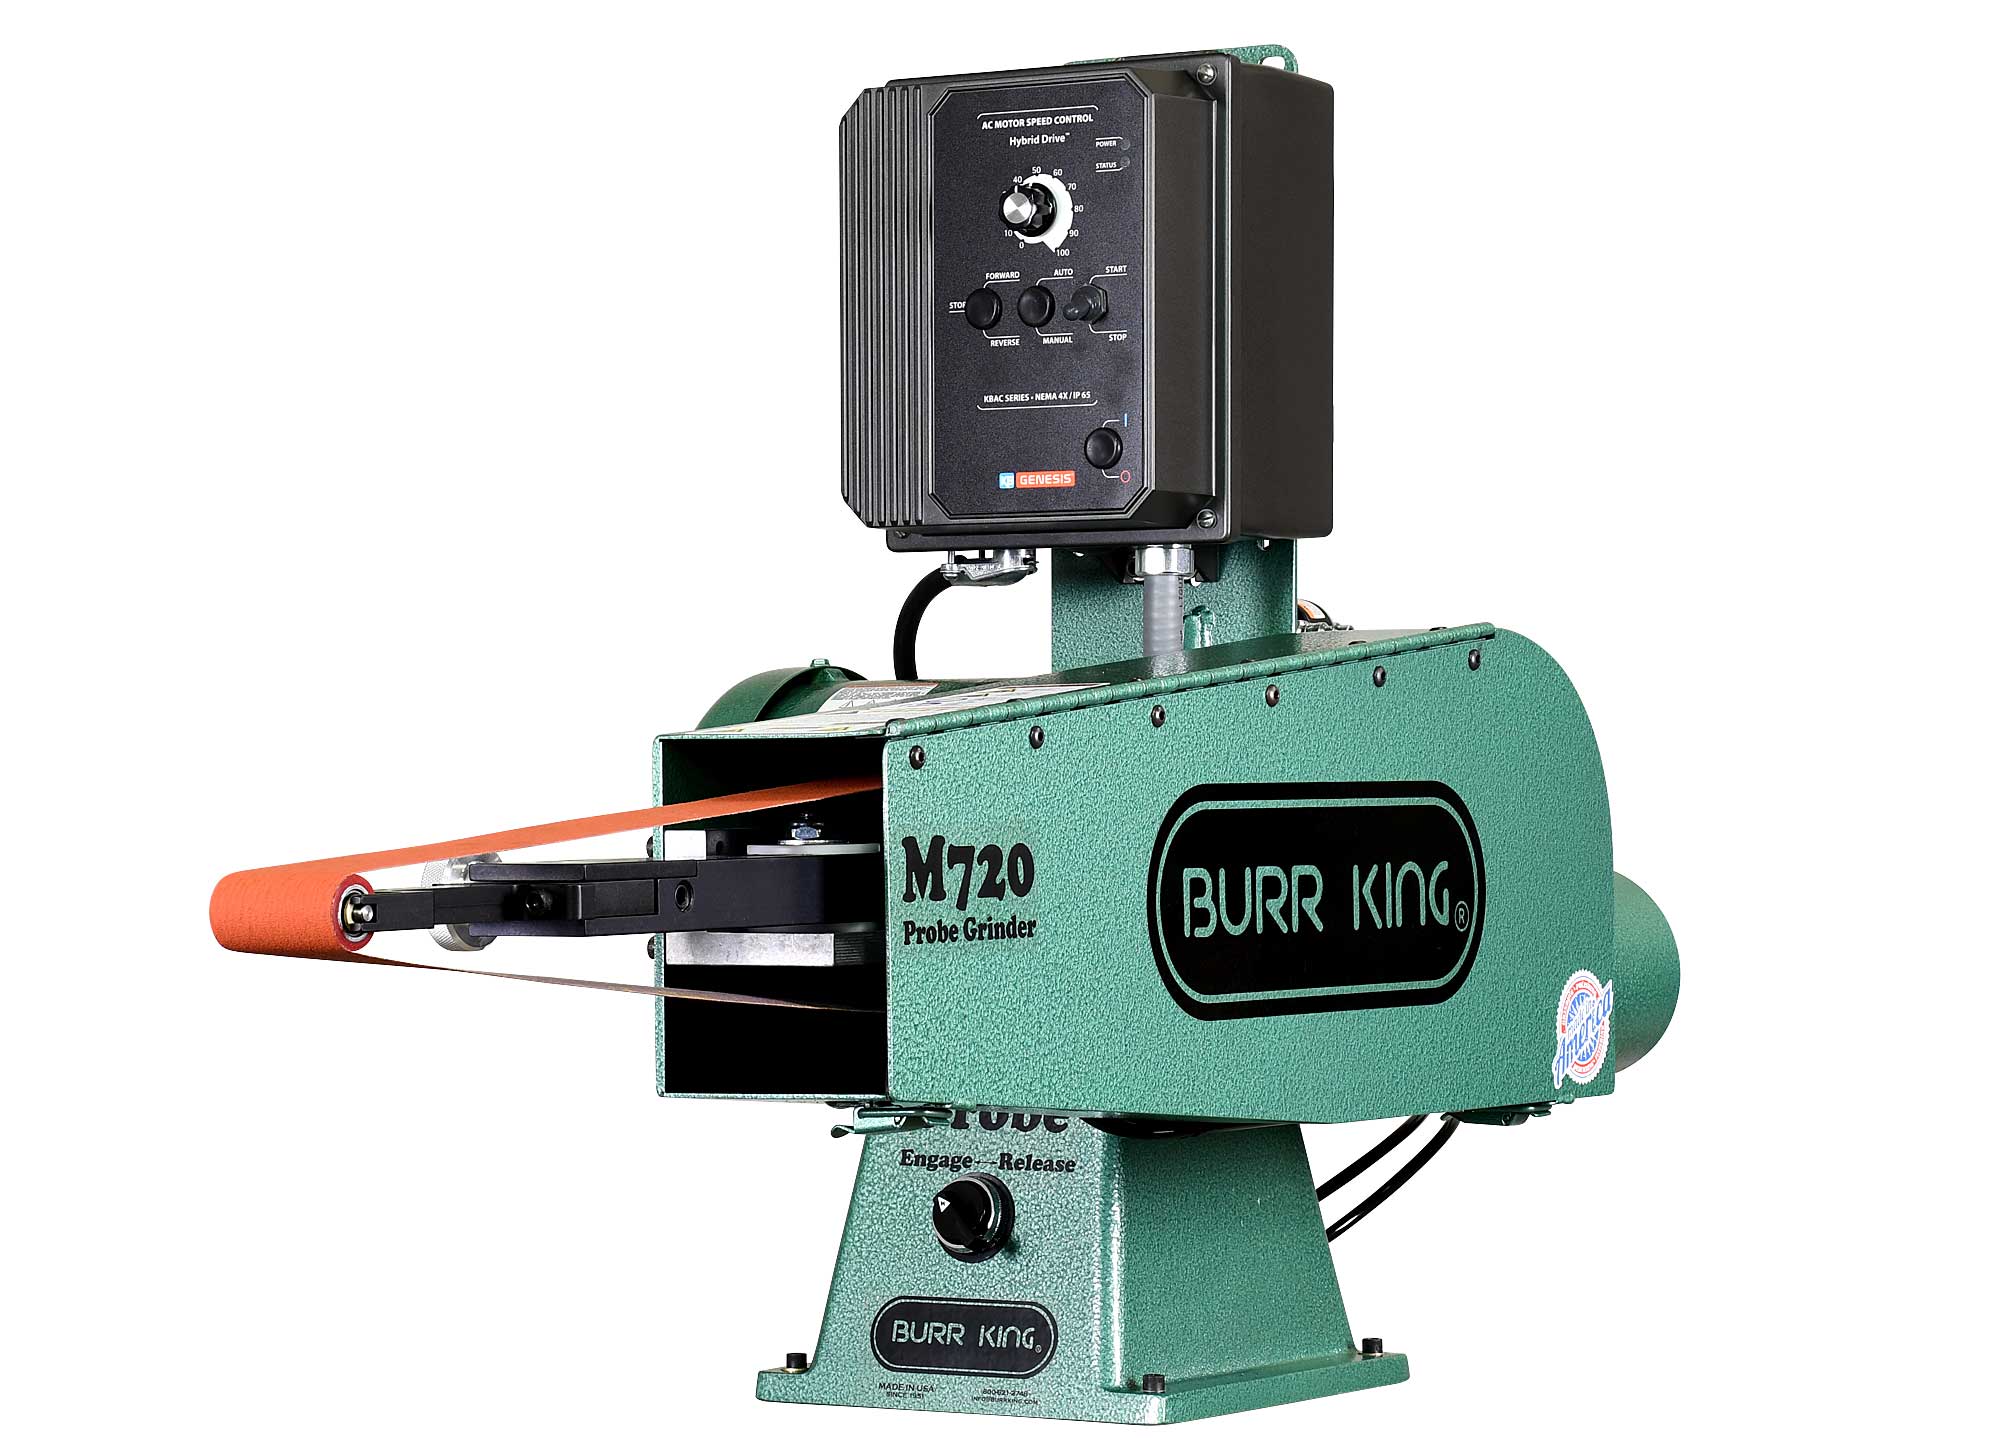 16110A Model 720 Probe Grinder with variable speed.  